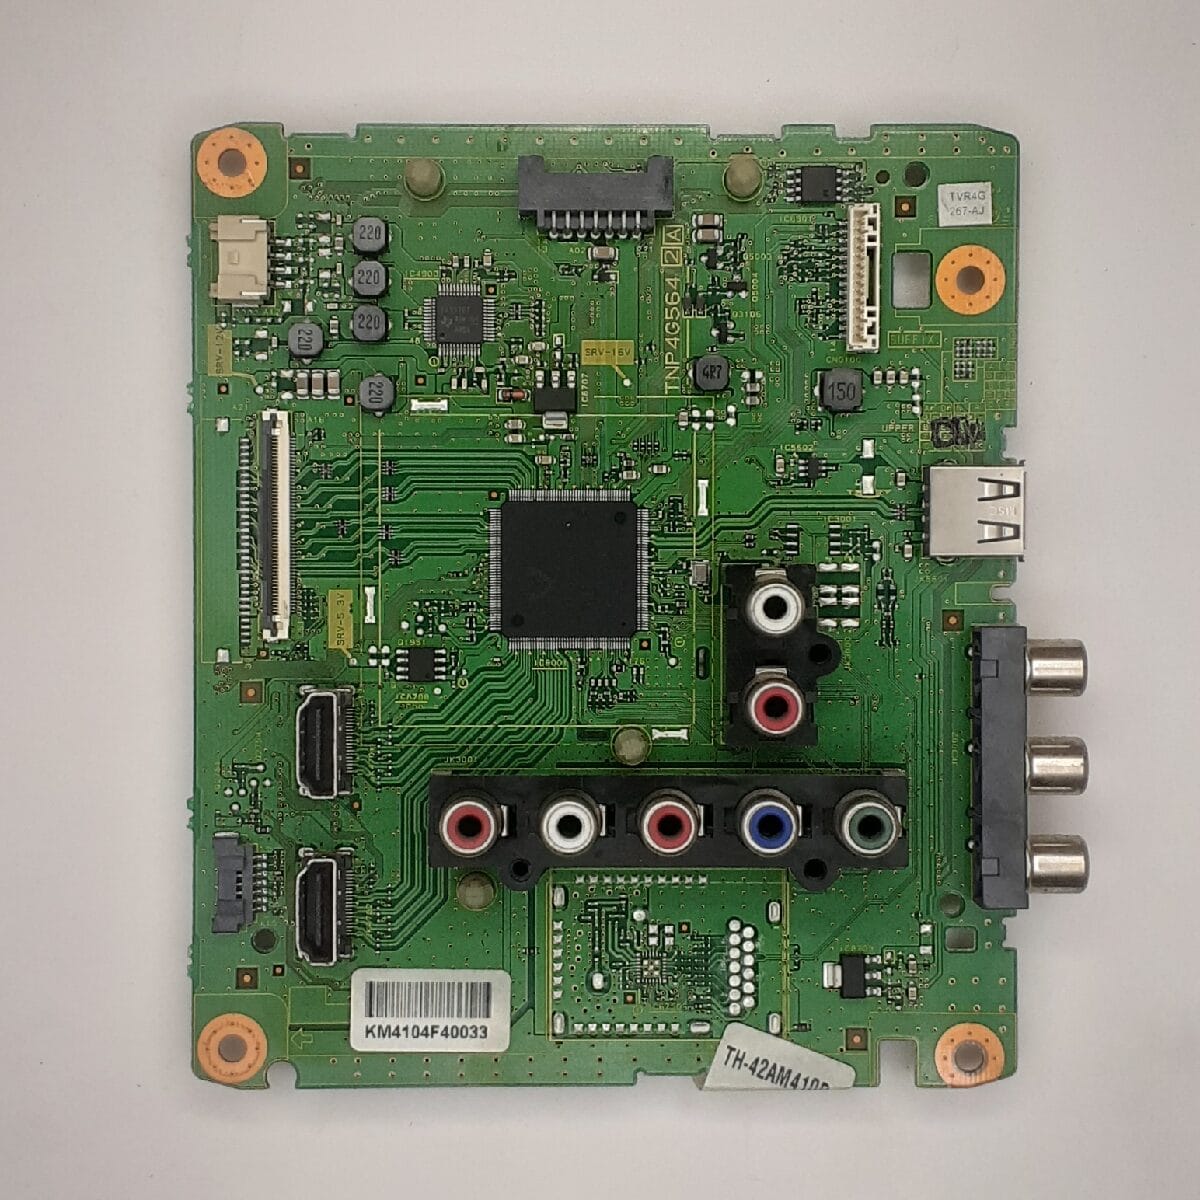 TH-42AM410D PANASONIC MOTHERBOARD FOR LED TV